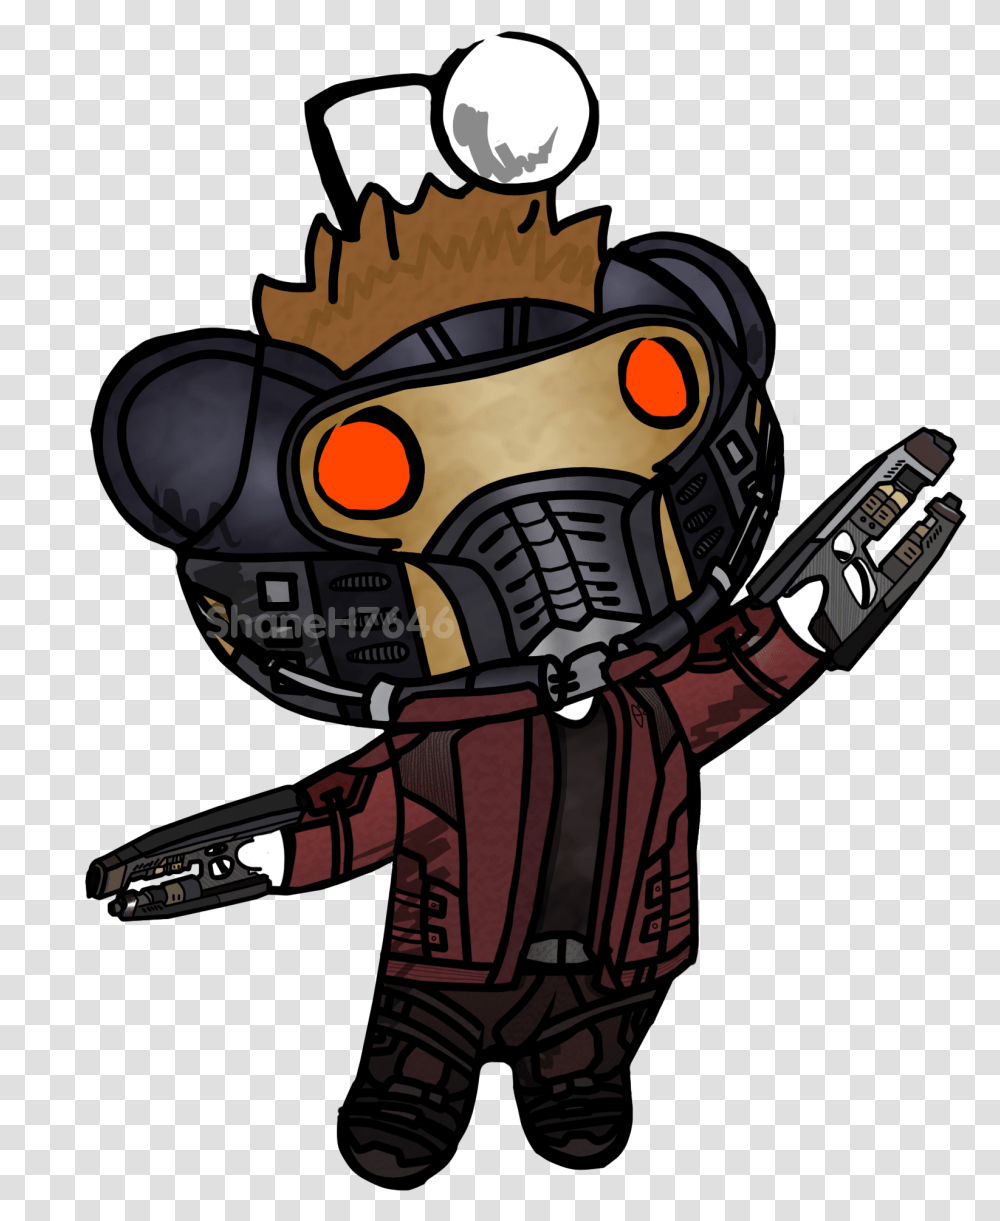 Star Lord Peter Quill Snoo Snoos Peter Quill Desenho, Helmet, Clothing, Apparel, Robot Transparent Png